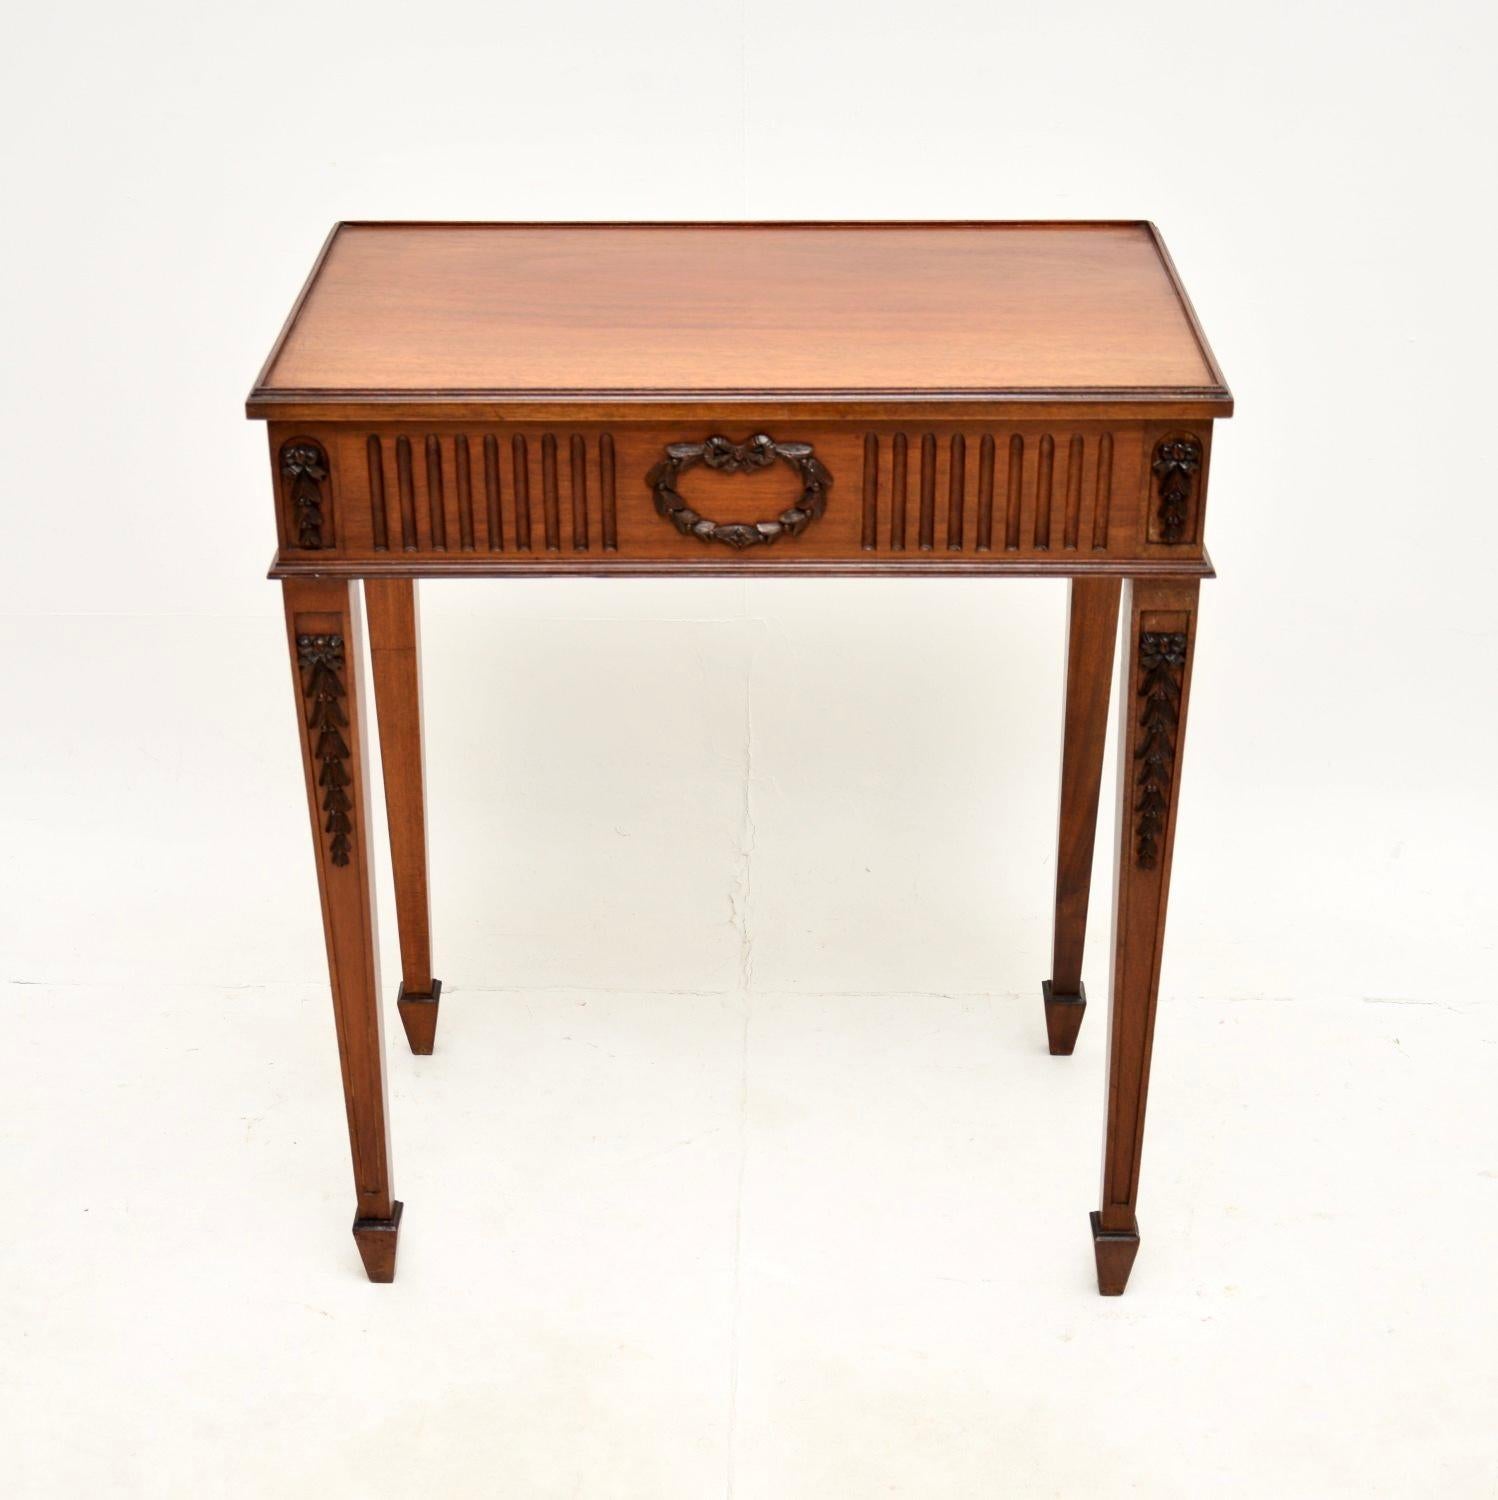 A beautiful antique side table in the Sheraton style. This was made in England, it dates from around the 1900-1910 period.

The quality is excellent, this is finely made with beautiful carving on the edges. It is a very useful size, sitting on